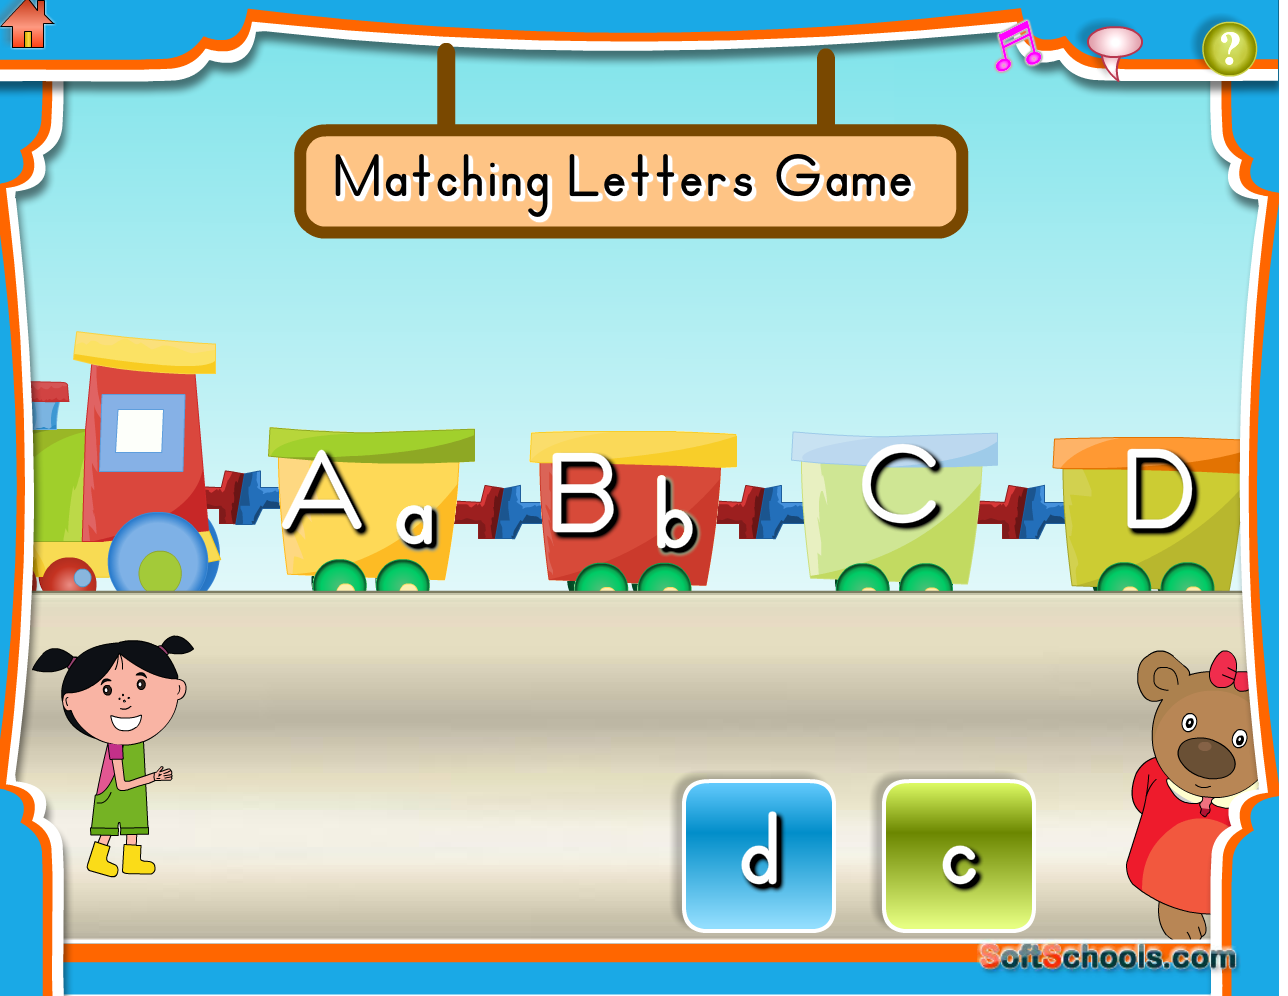 Match site. The Letter игра. Matching Letter игра. Game Match the Letters. Letters games for Kids.